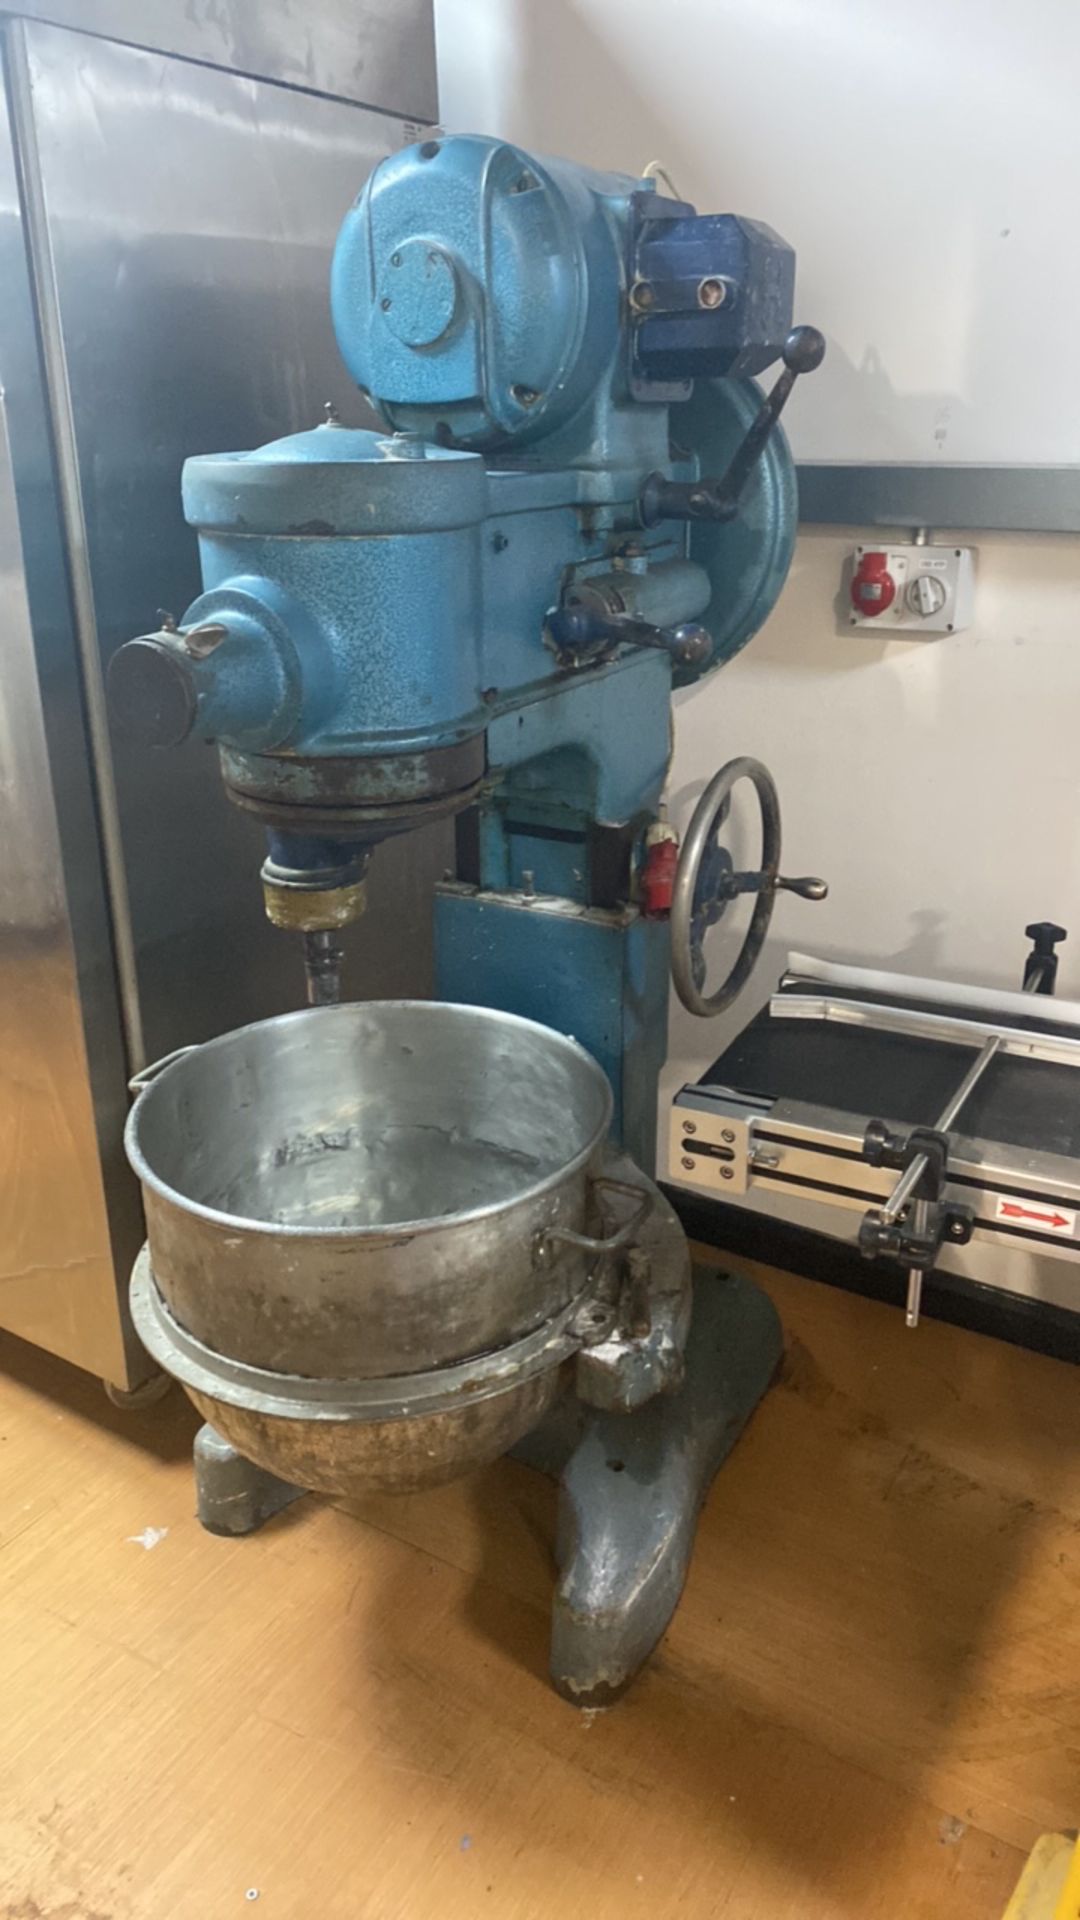 Blue Stand Mixer Stated to be working Untested Approximate Dimensions: Height - 172cm Width - 74cm